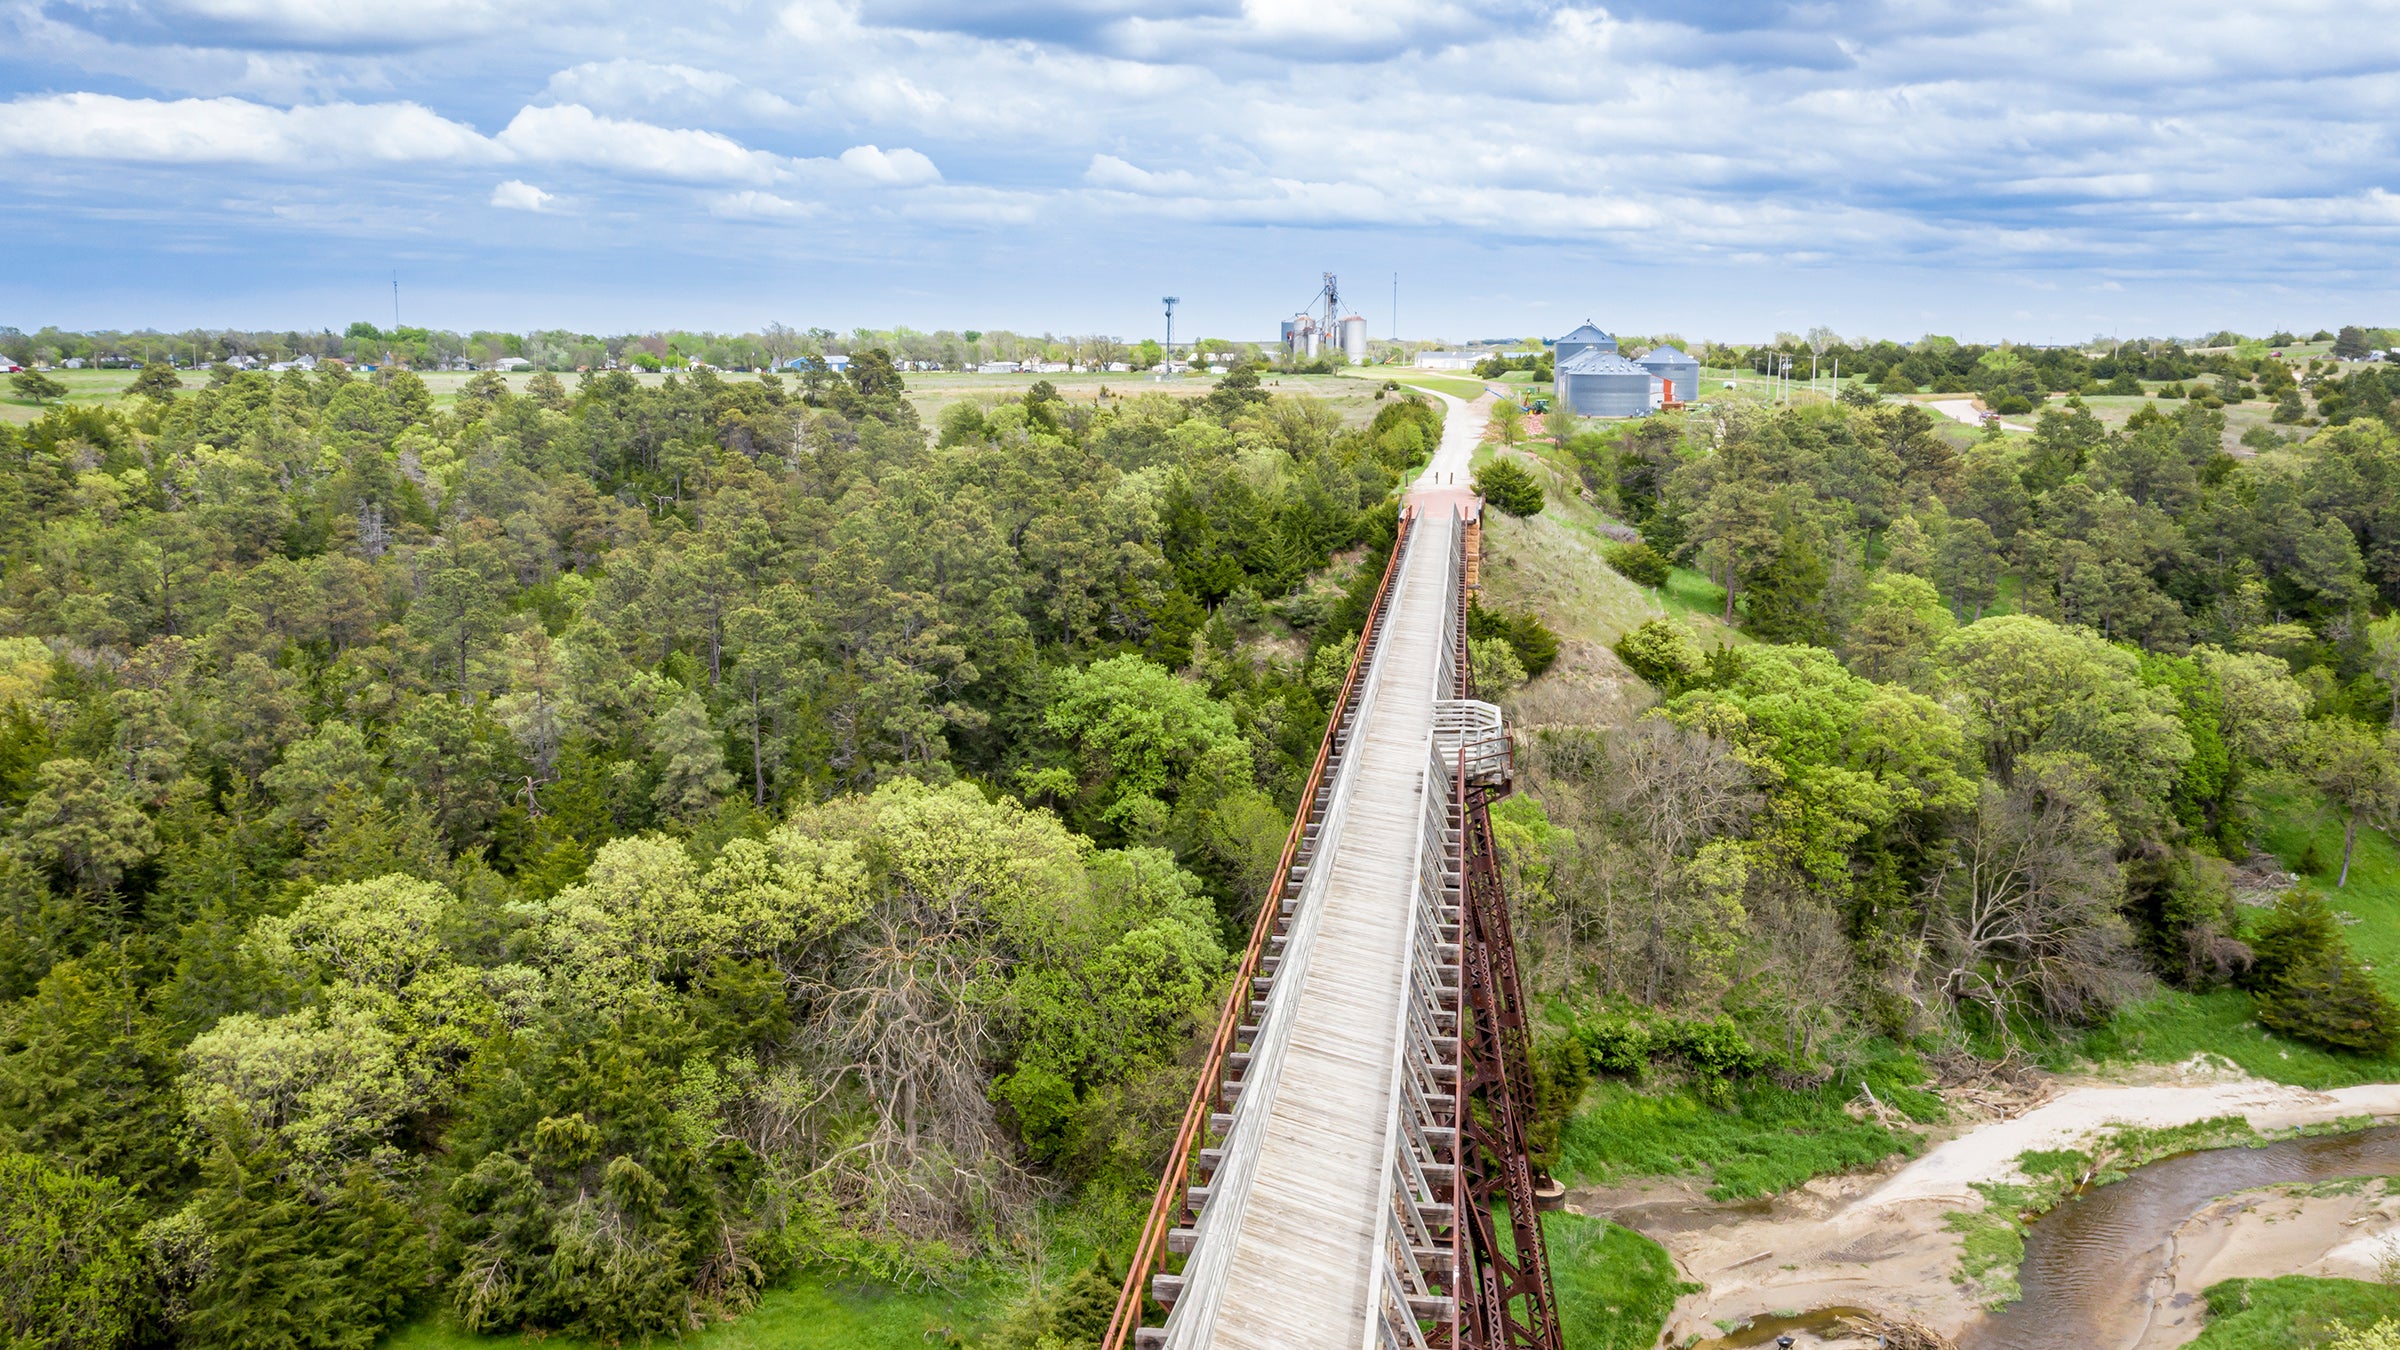 The 25 Best Rail Trails in the U.S.